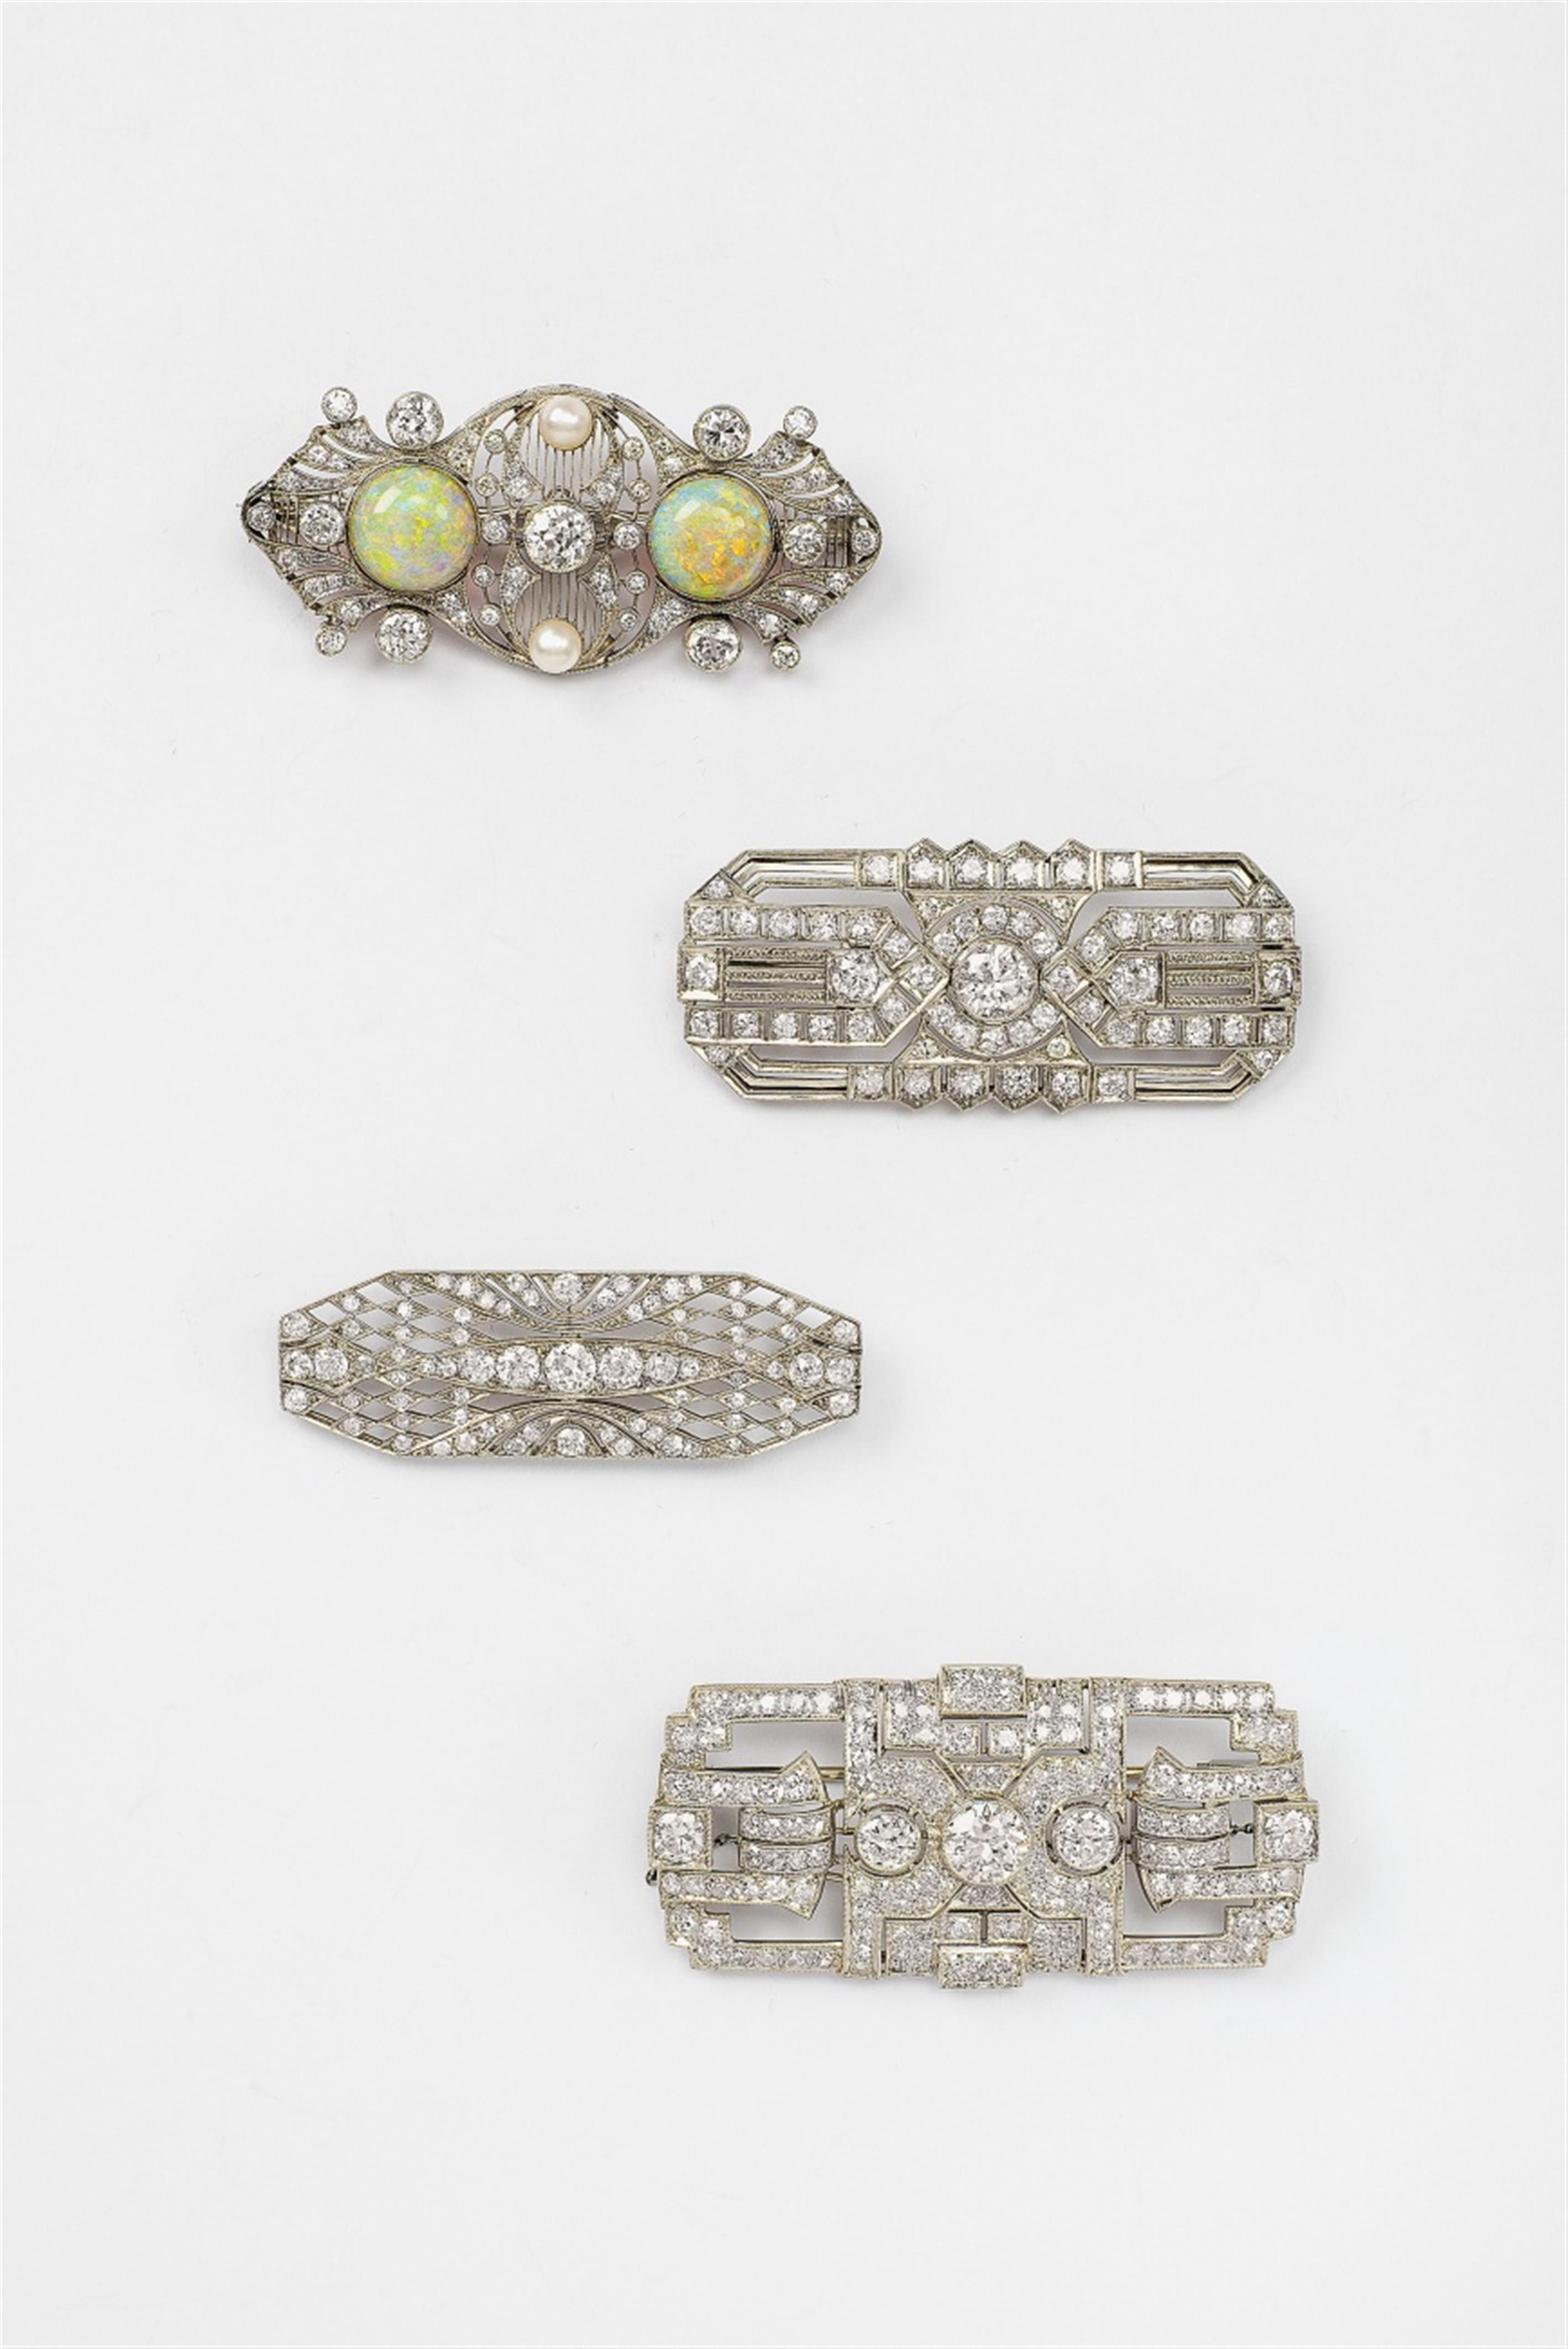 A Belle Epoque platinum and opal brooch - image-3